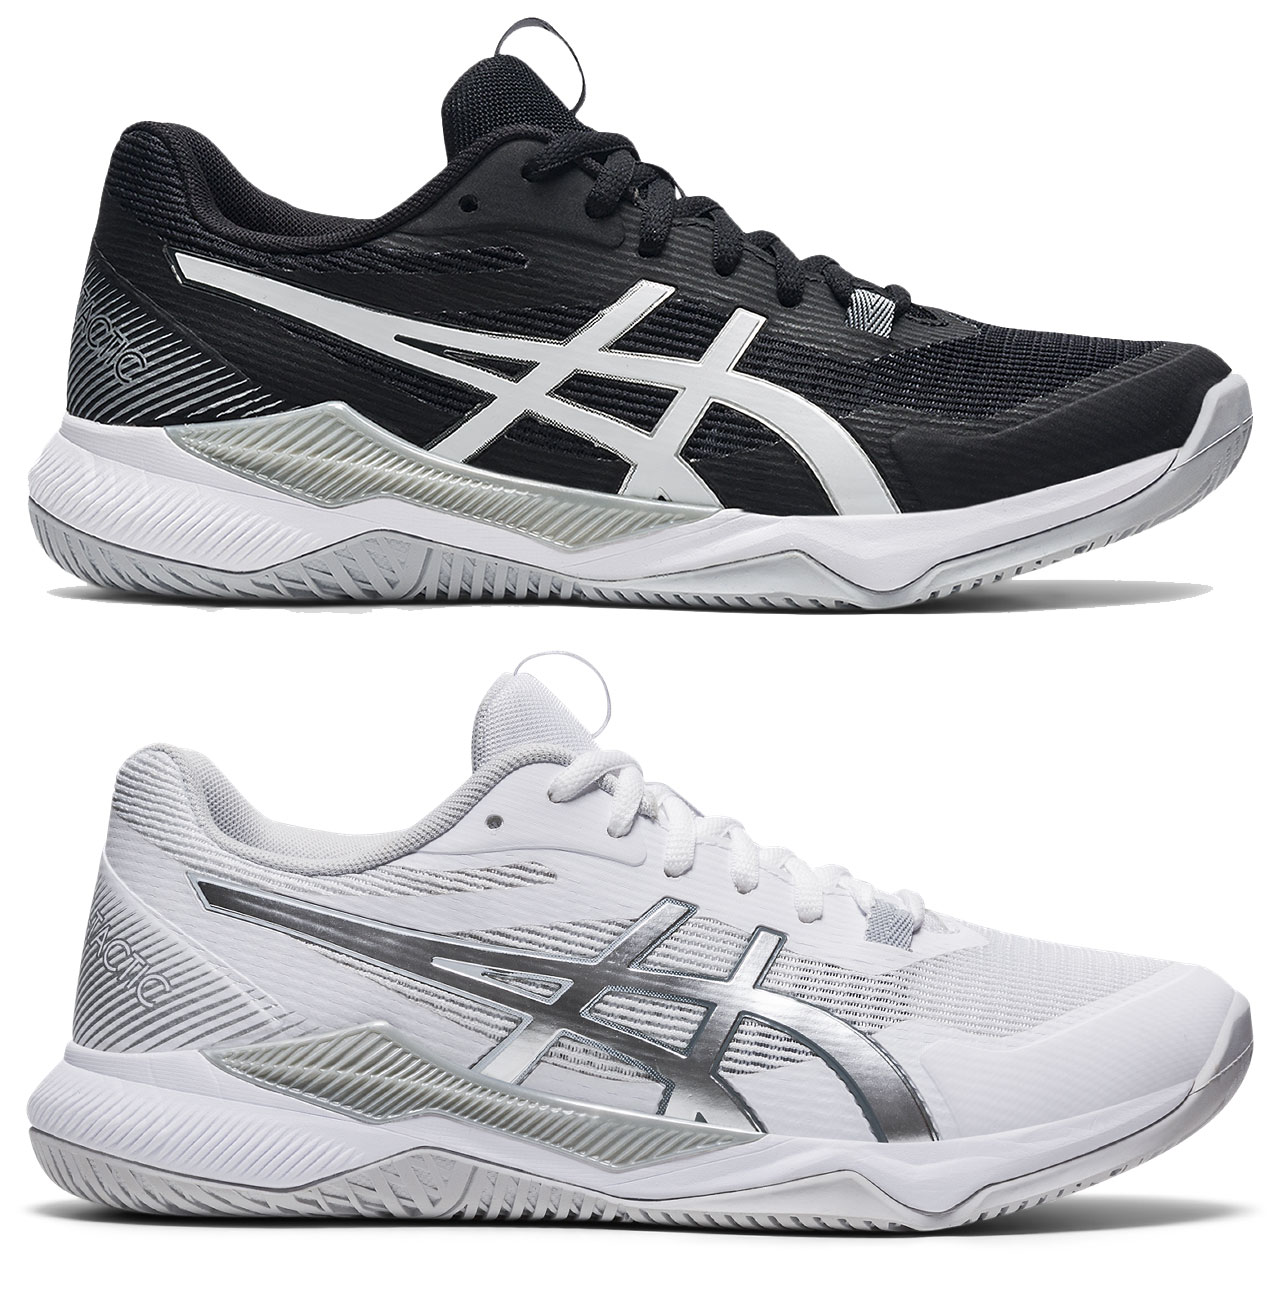 Asics Women's Gel-Tactic Shoe | Midwest Volleyball Warehouse